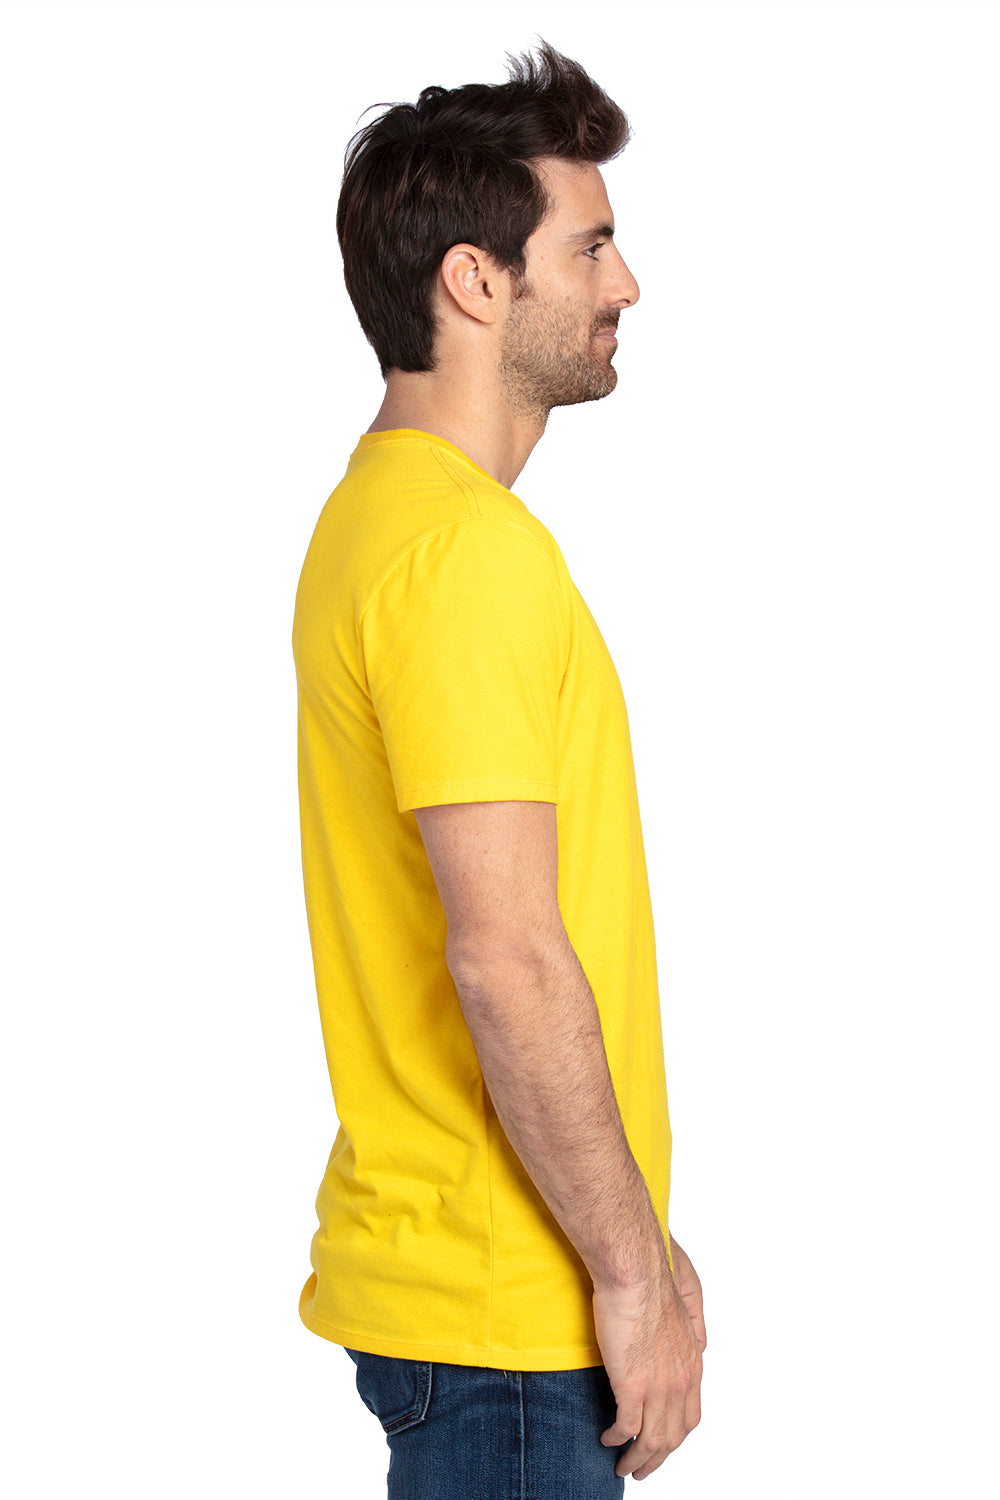 Threadfast Apparel 100A Mens Ultimate Short Sleeve Crewneck T-Shirt Safety Yellow Side